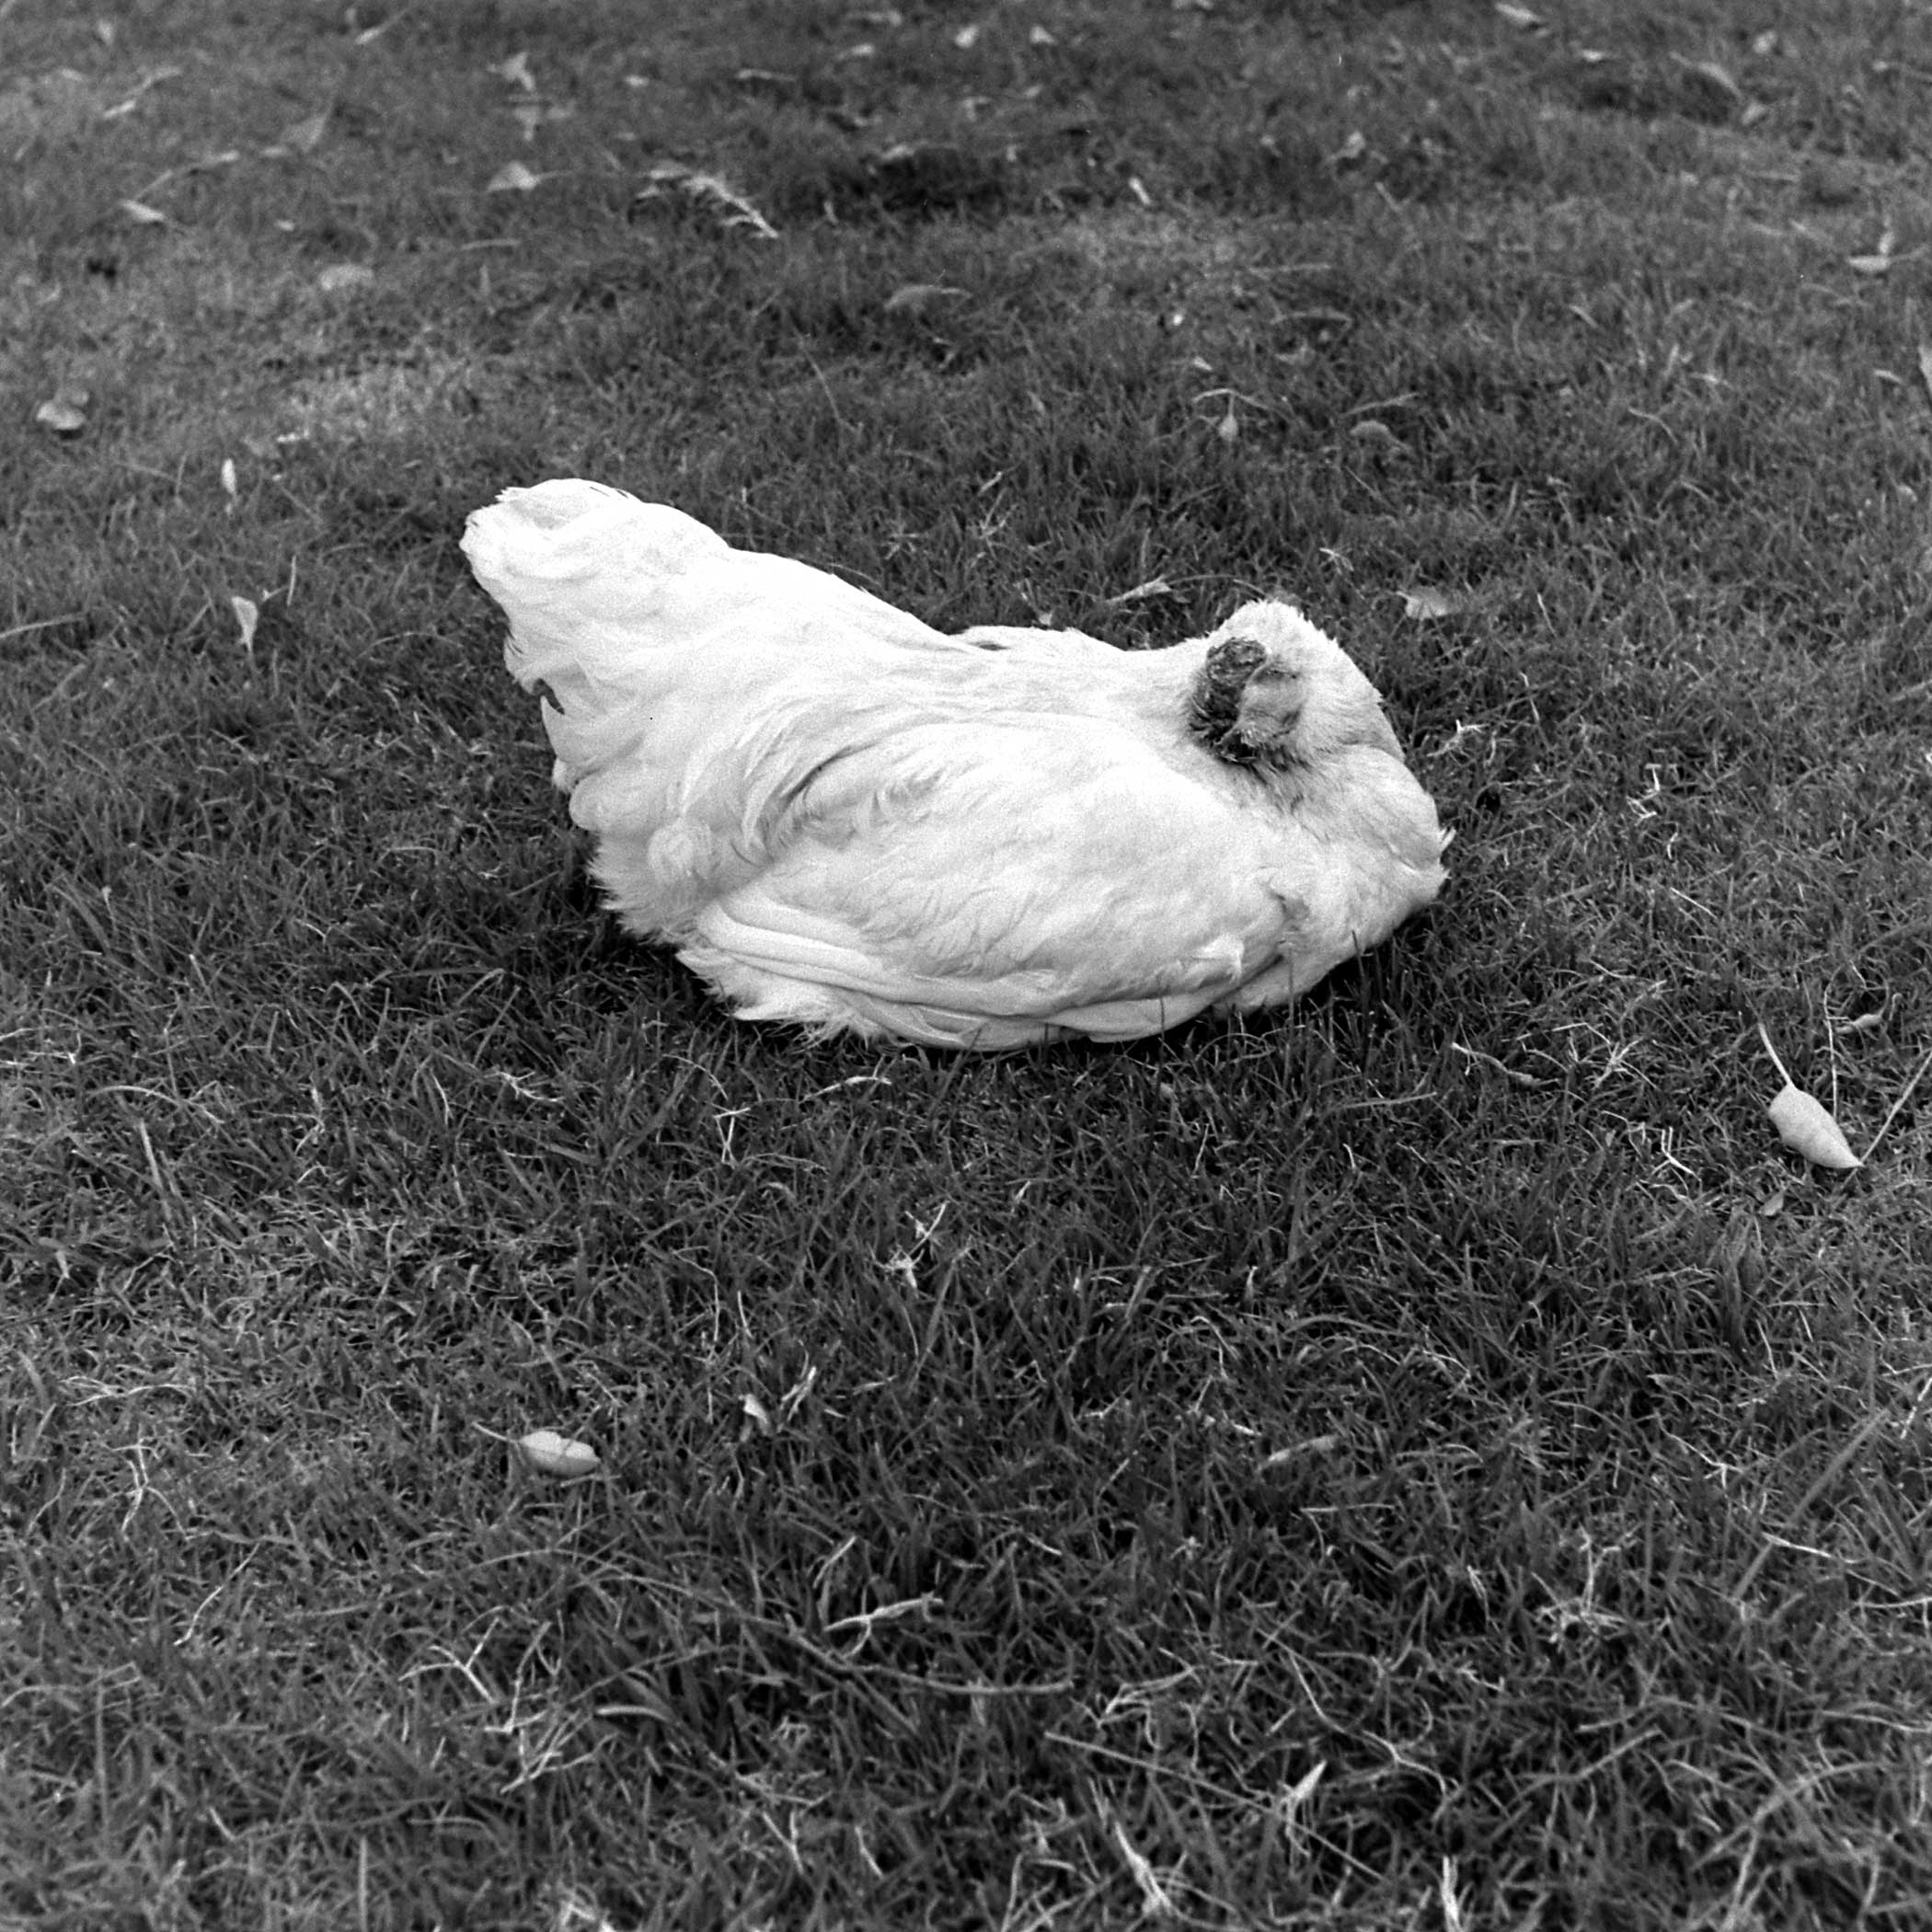 Mike the headless chicken rests in the grass in 1945.